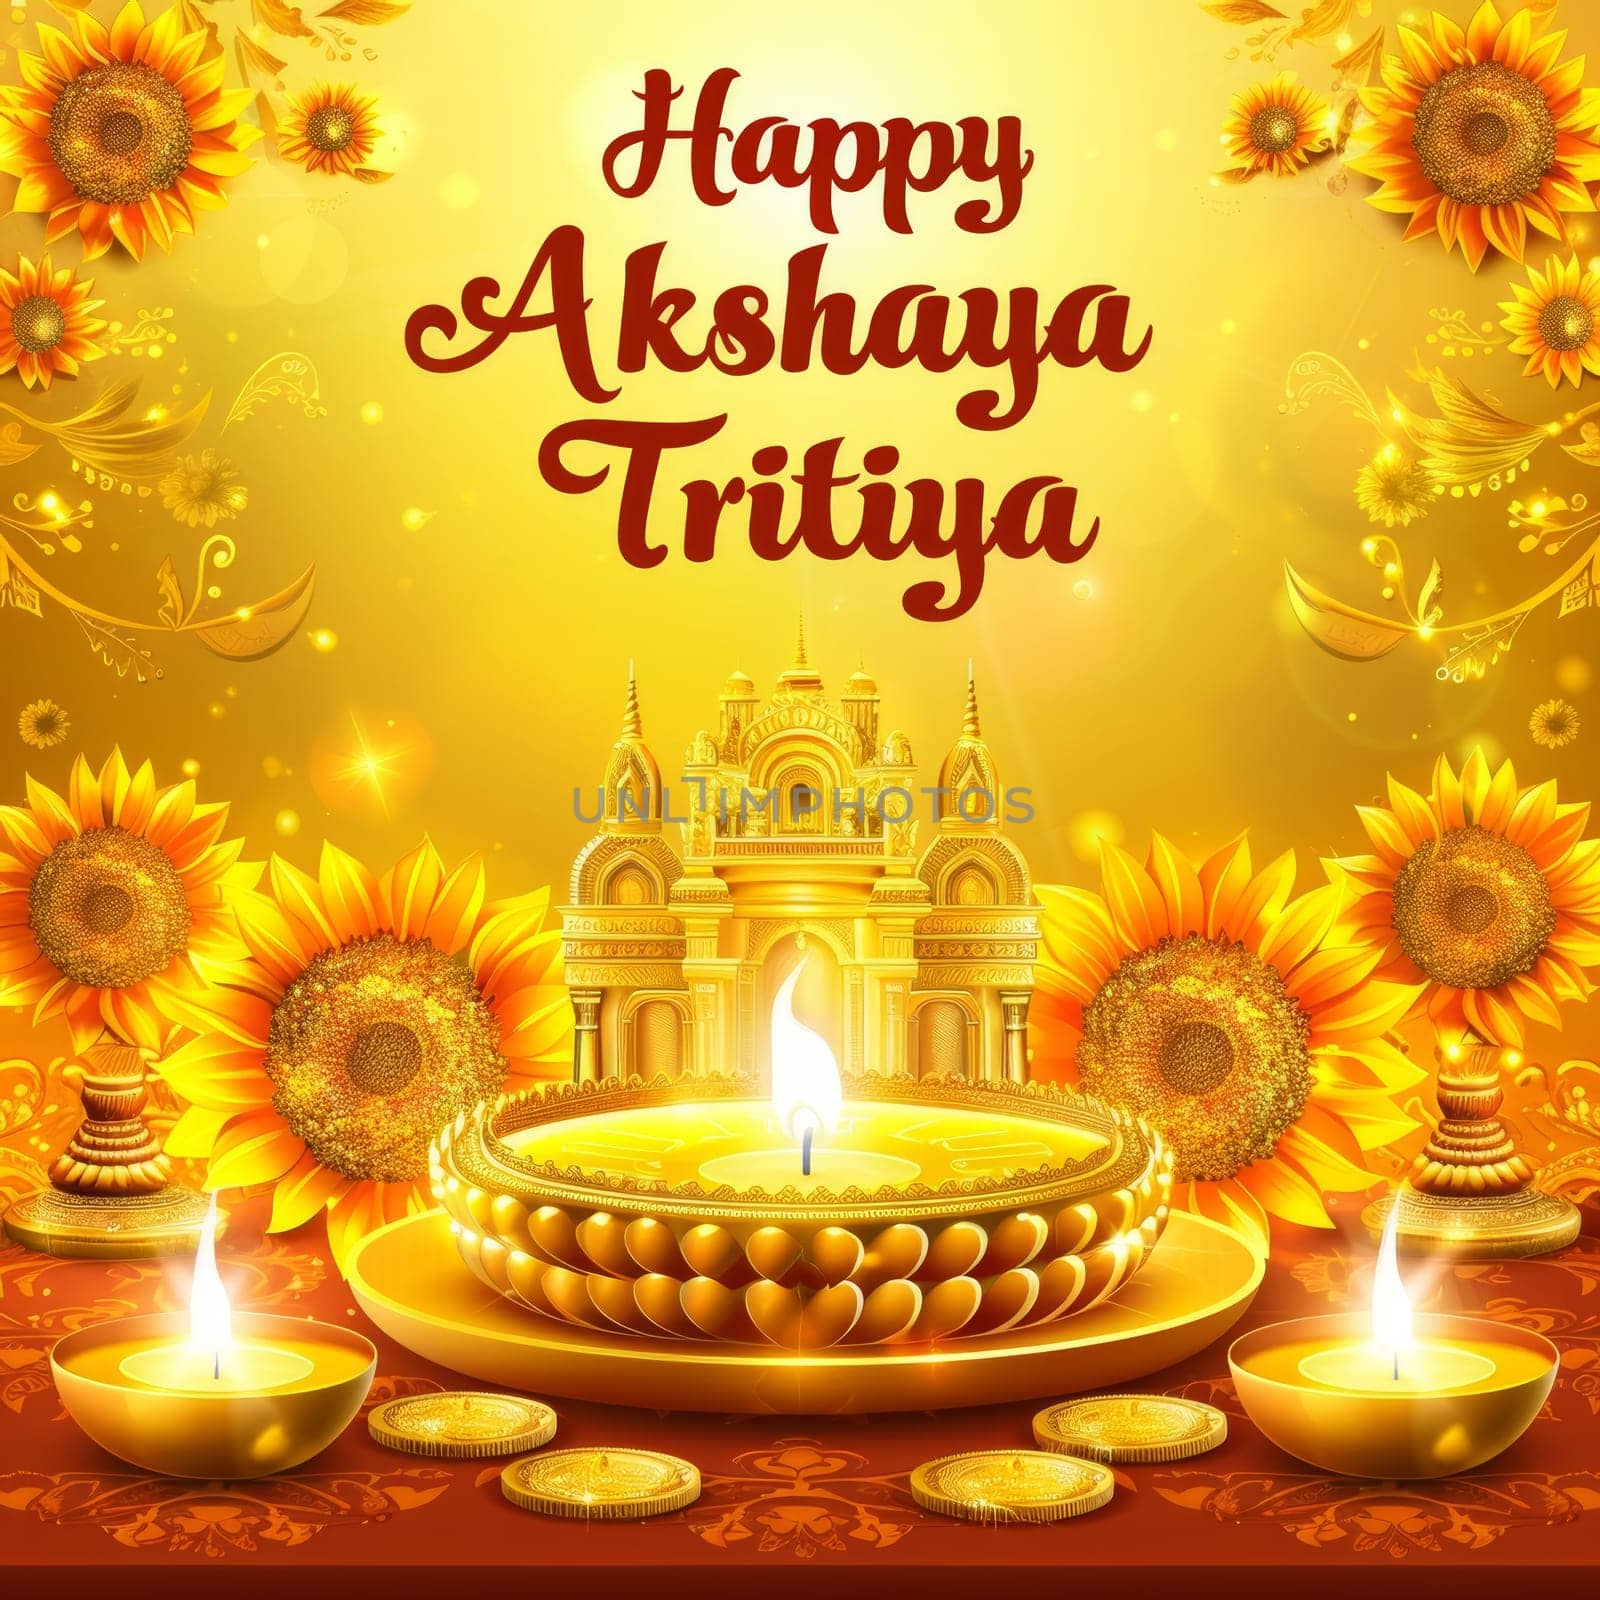 Festive graphic for Akshaya Tritiya with a golden temple, oil lamps, sunflowers, and glitters on a yellow background. by sfinks